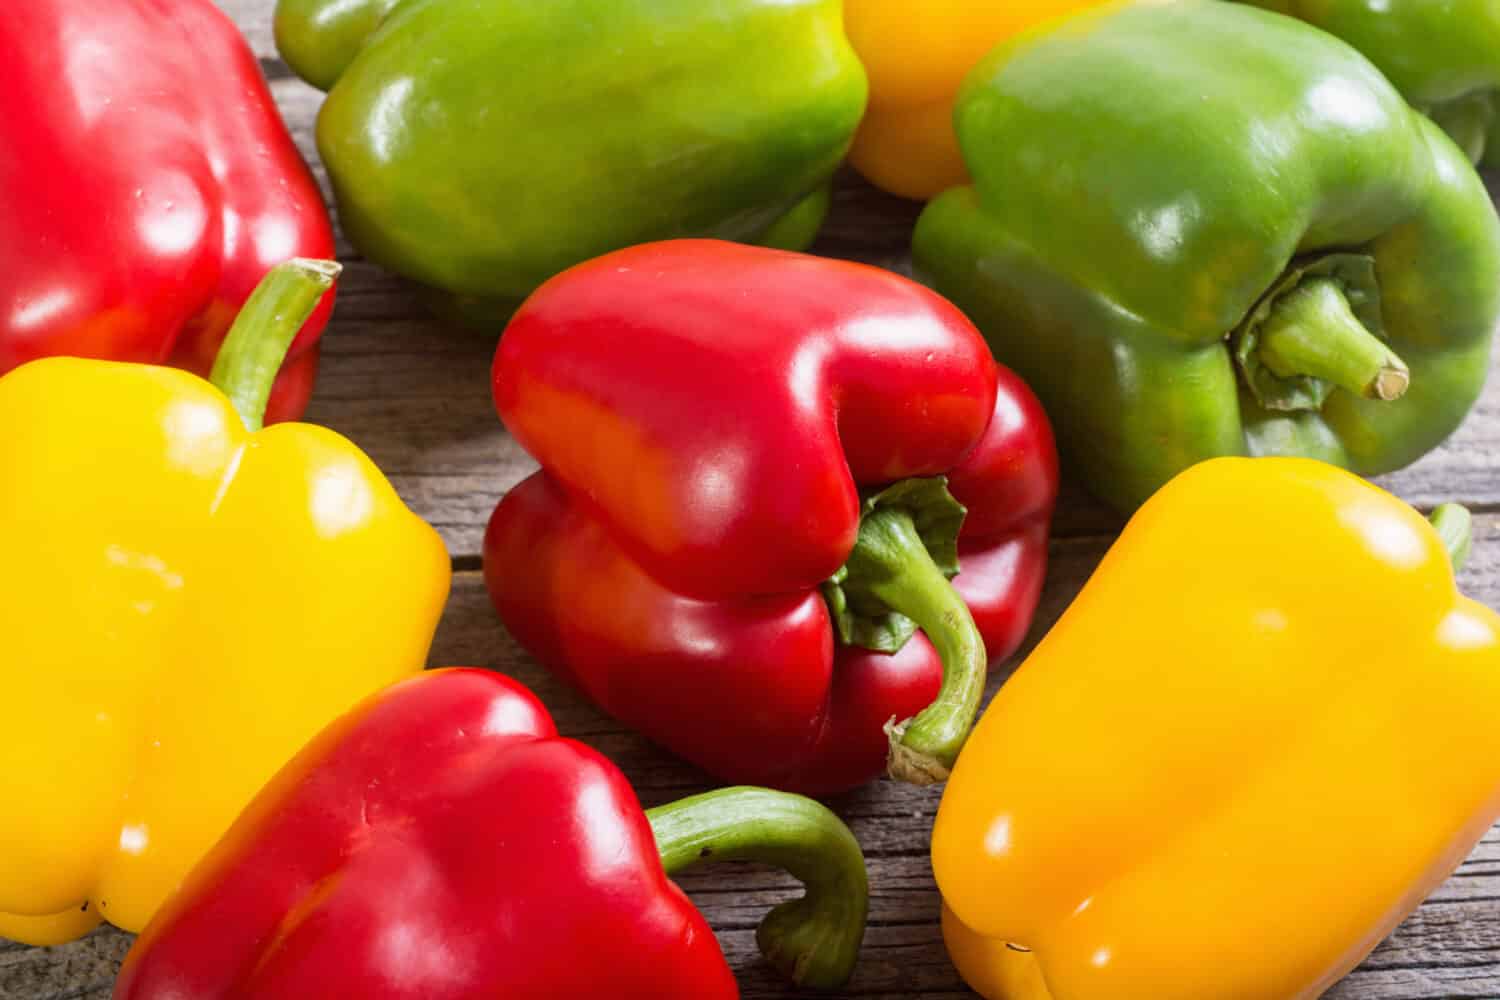 Colorful green , red and yellow peppers paprika background